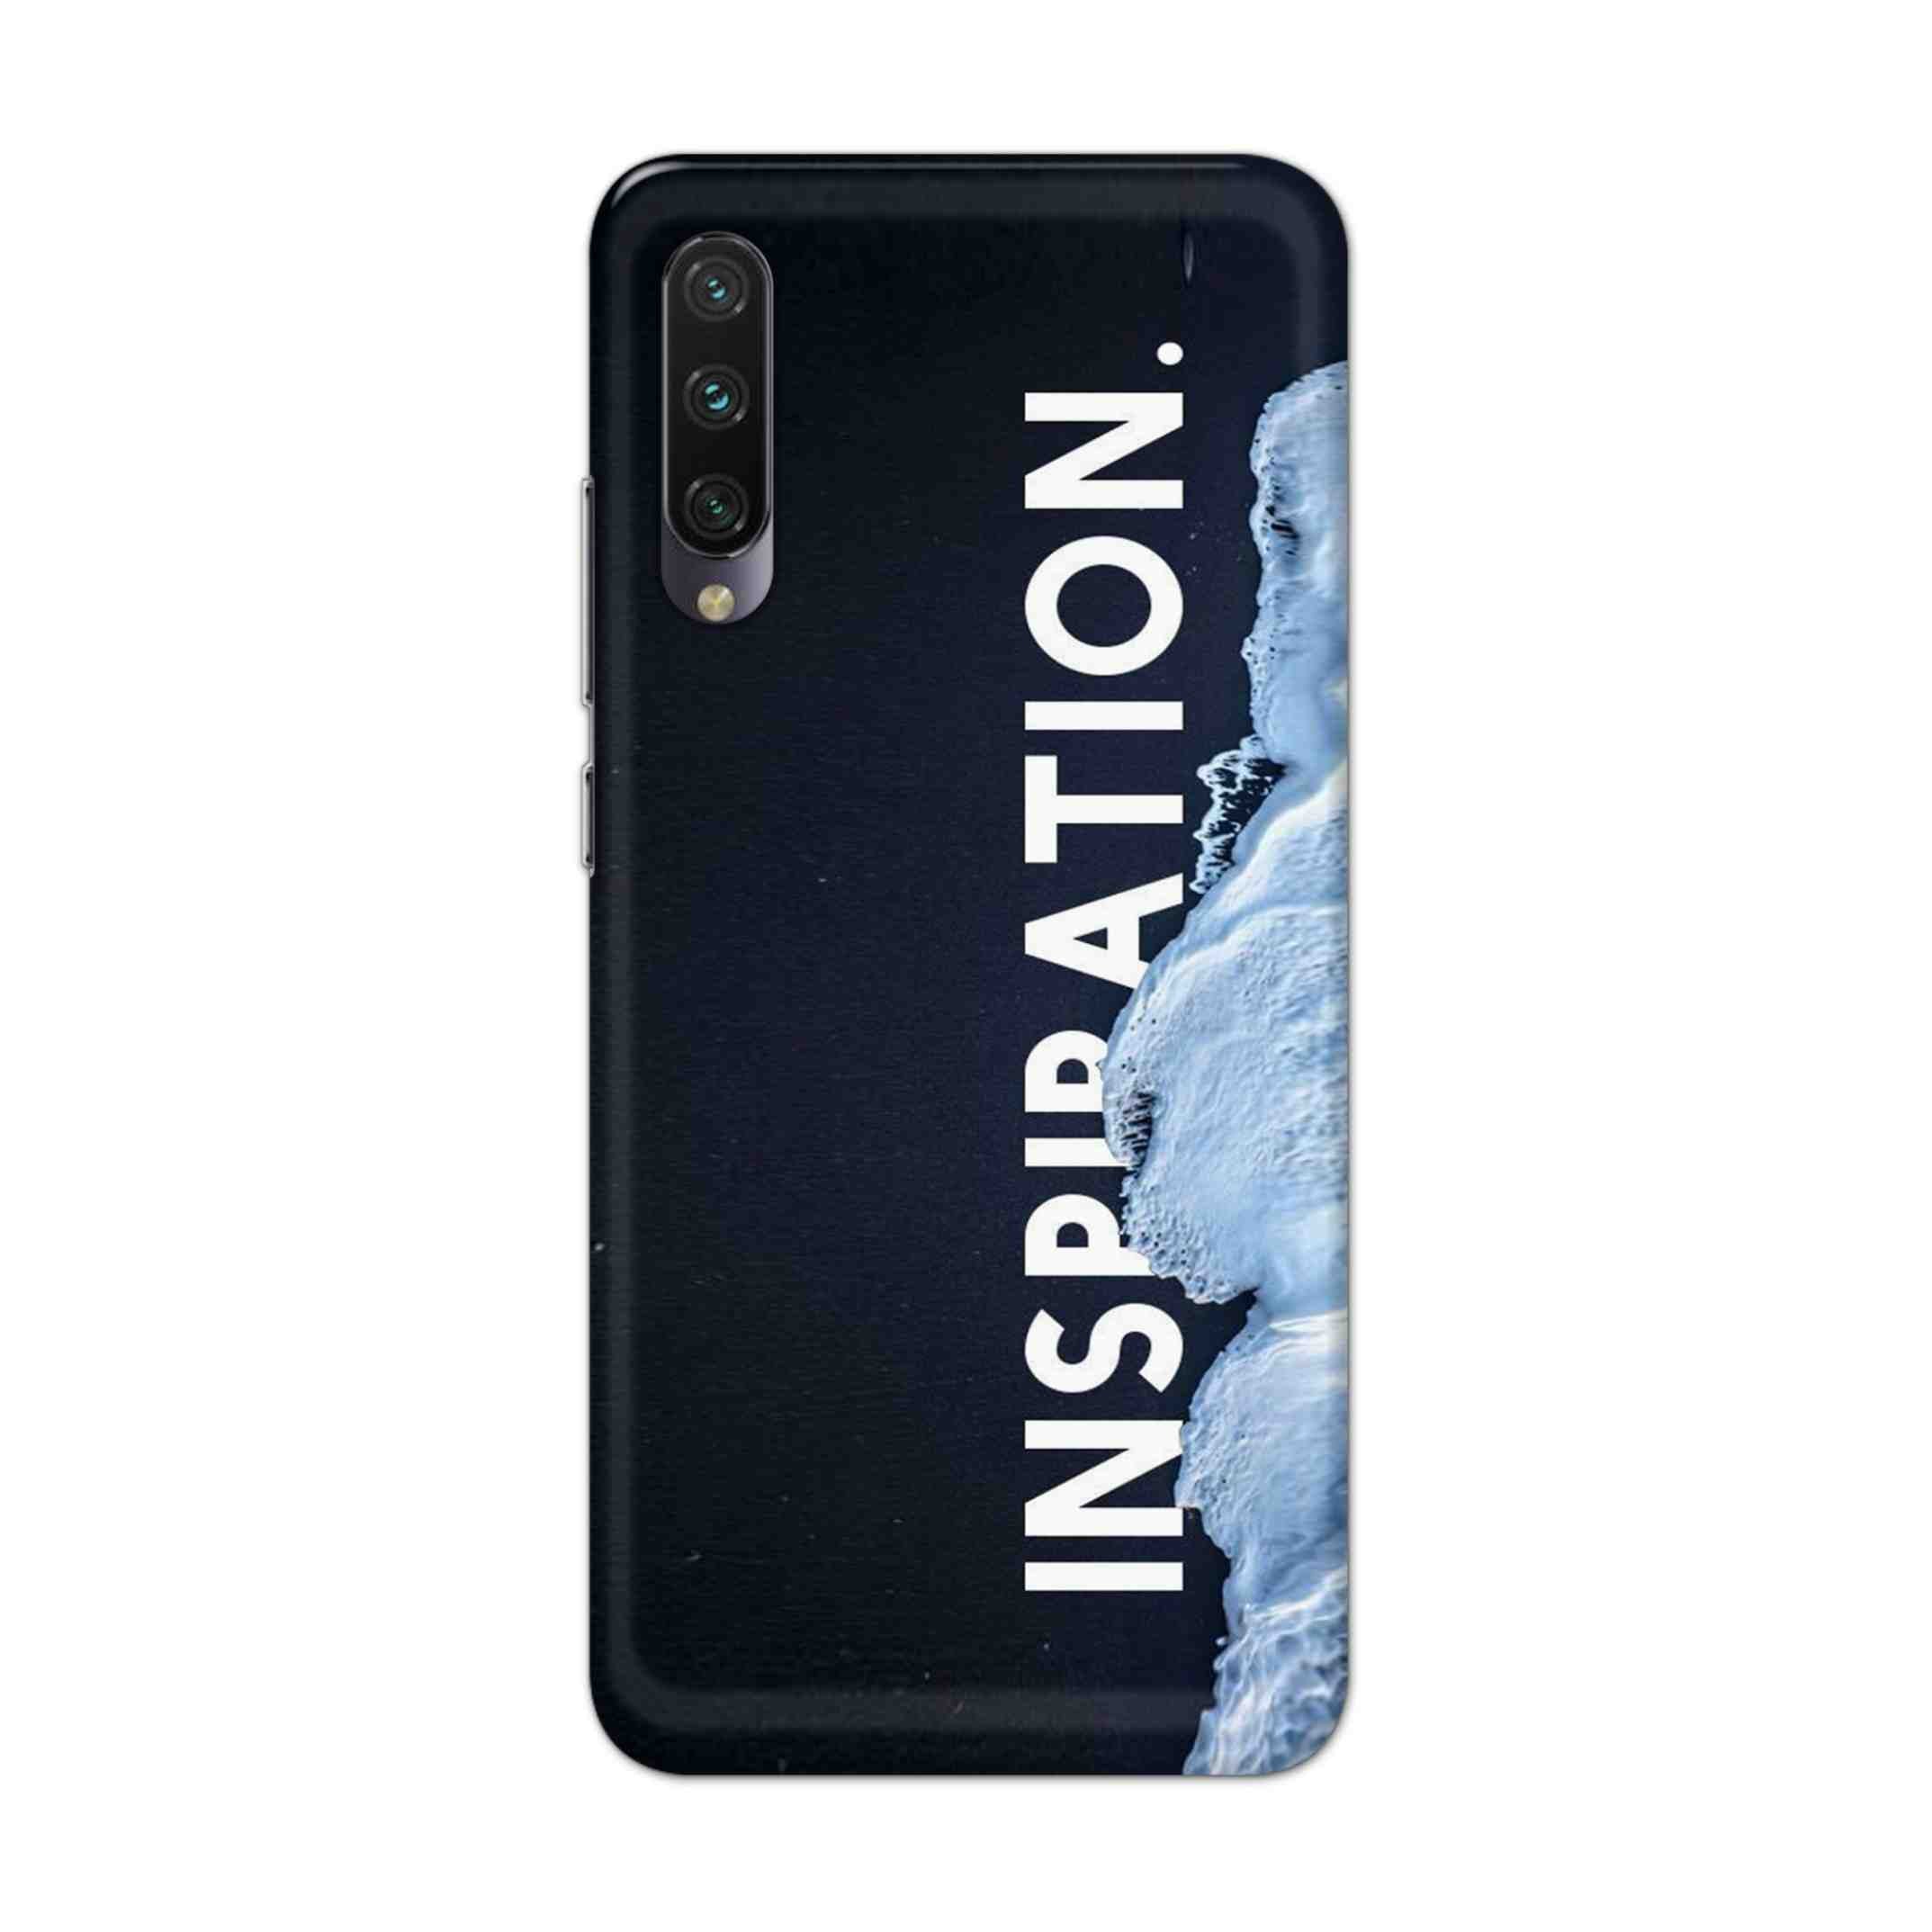 Buy Inspiration Hard Back Mobile Phone Case Cover For Xiaomi Mi A3 Online